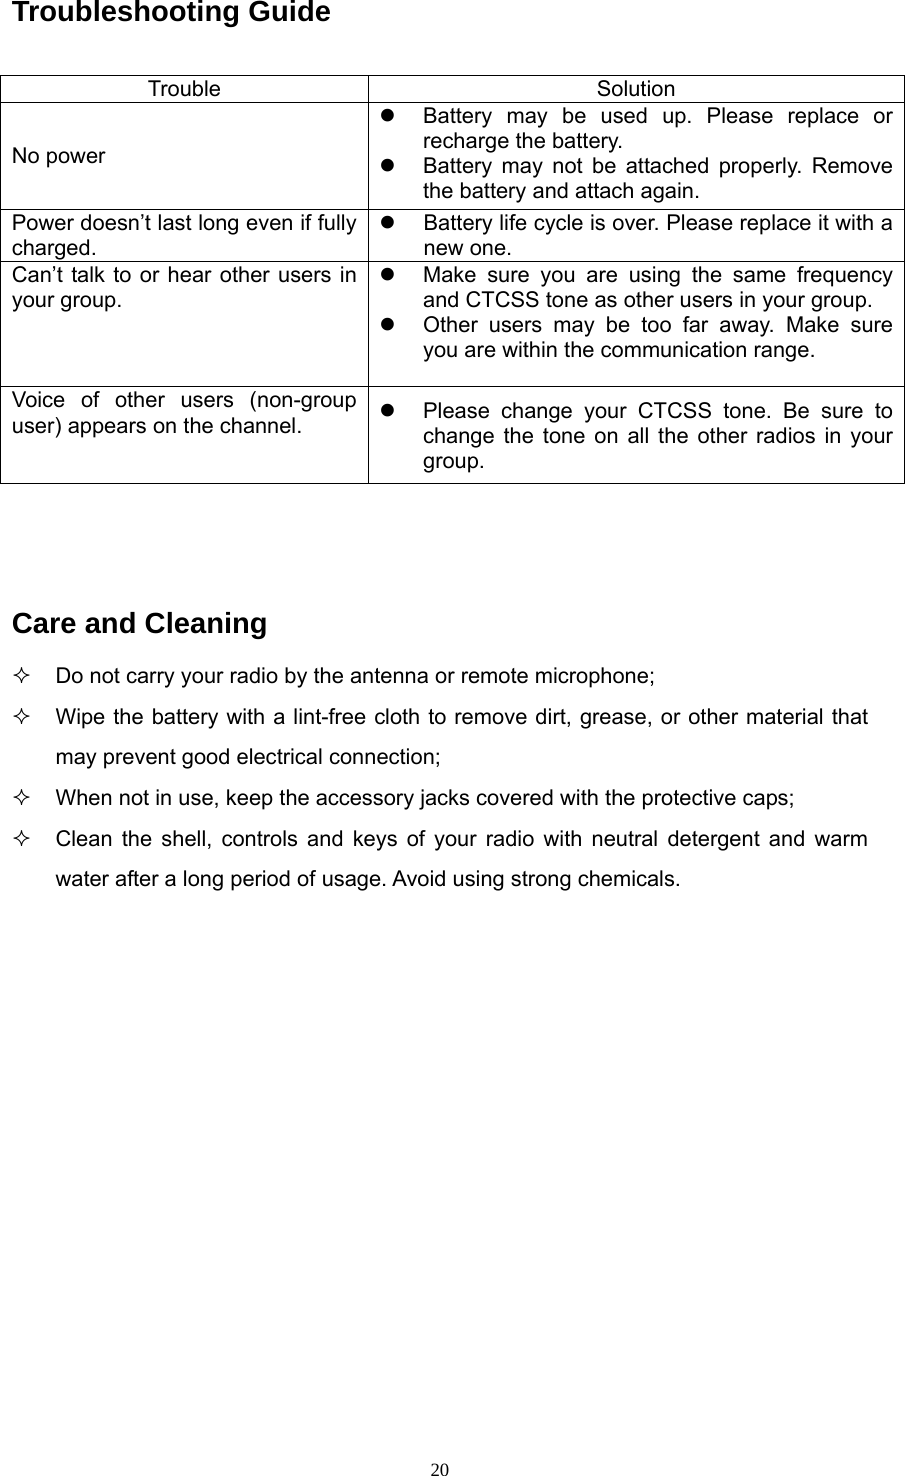  20Troubleshooting Guide   Care and Cleaning   Do not carry your radio by the antenna or remote microphone;   Wipe the battery with a lint-free cloth to remove dirt, grease, or other material that may prevent good electrical connection;   When not in use, keep the accessory jacks covered with the protective caps;   Clean the shell, controls and keys of your radio with neutral detergent and warm water after a long period of usage. Avoid using strong chemicals.             Trouble Solution No power z  Battery may be used up. Please replace or recharge the battery. z  Battery may not be attached properly. Remove the battery and attach again. Power doesn’t last long even if fully charged. z  Battery life cycle is over. Please replace it with a new one. Can’t talk to or hear other users in your group. z  Make sure you are using the same frequency and CTCSS tone as other users in your group. z  Other users may be too far away. Make sure you are within the communication range. Voice of other users (non-group user) appears on the channel.  z  Please change your CTCSS tone. Be sure to change the tone on all the other radios in your group. 